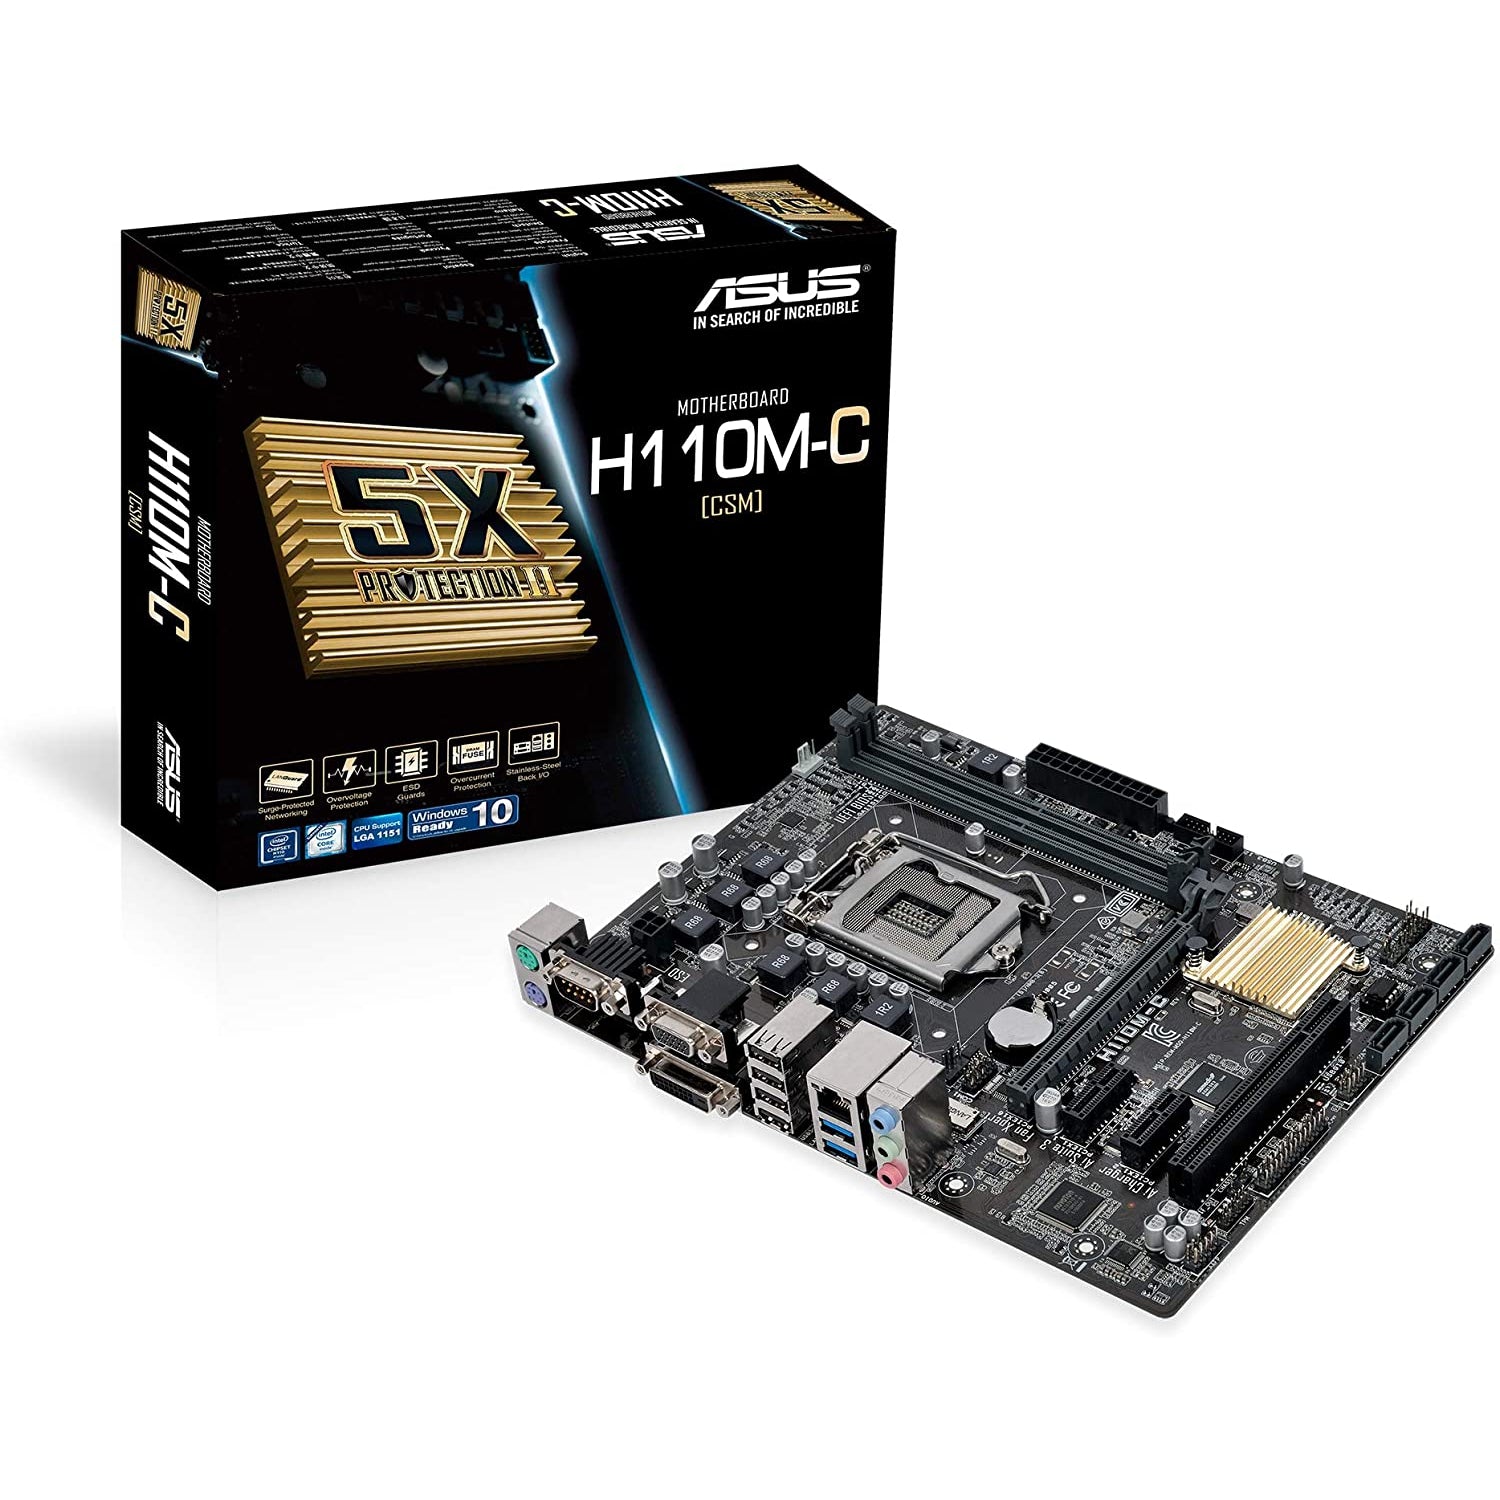 ASUS H110M-C Motherboard 90MB0NY0-M0EAY0